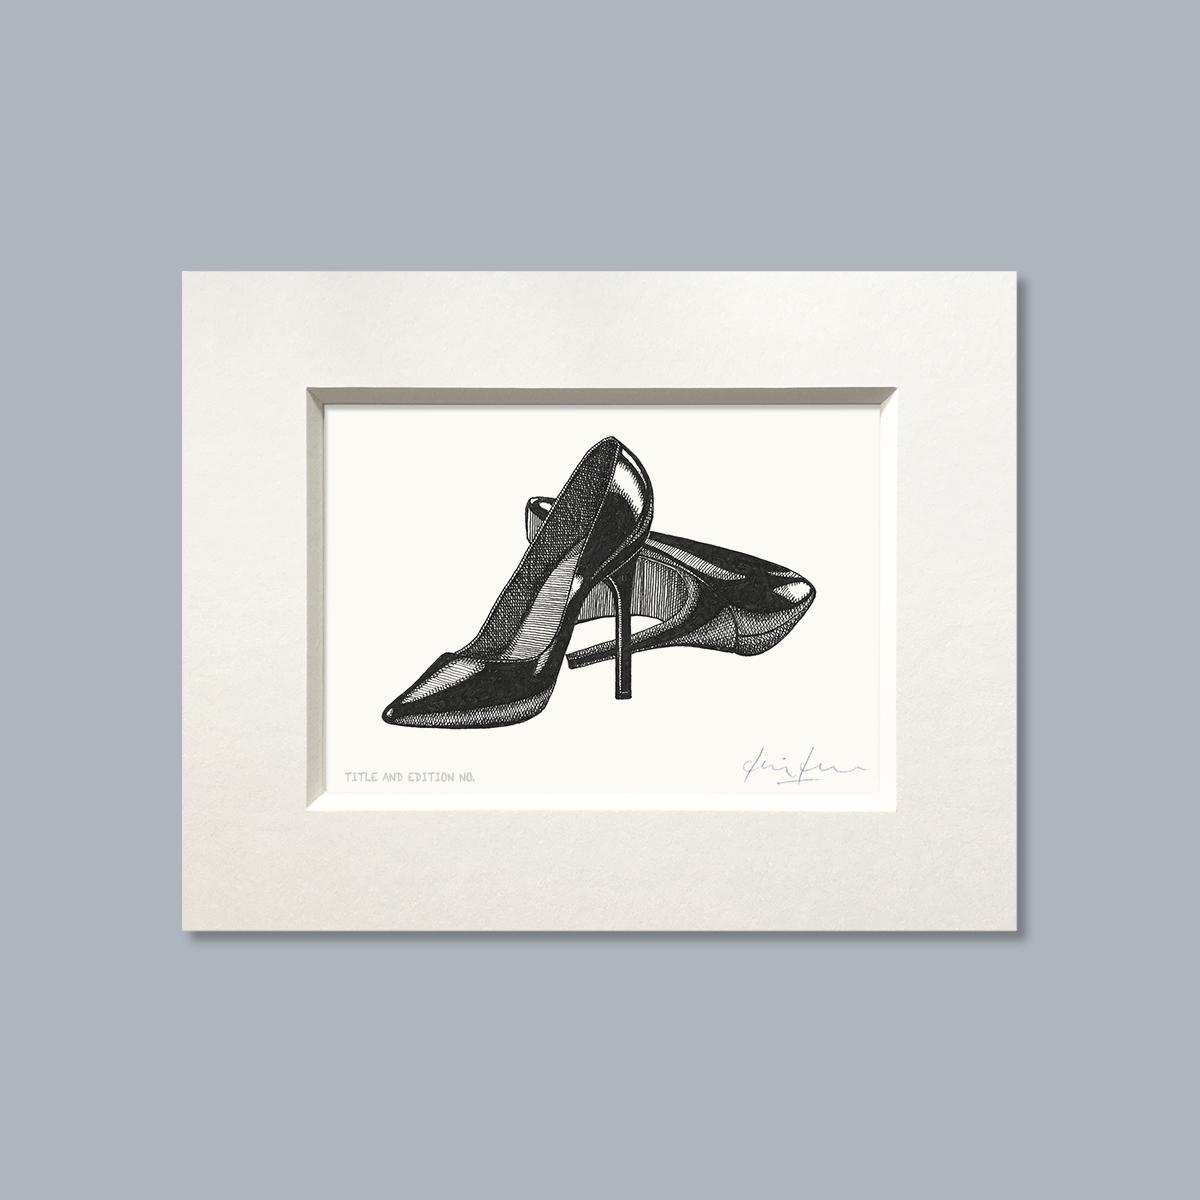 Limited edition print from pen and ink drawing of a pair of stiletto heels in a white mount